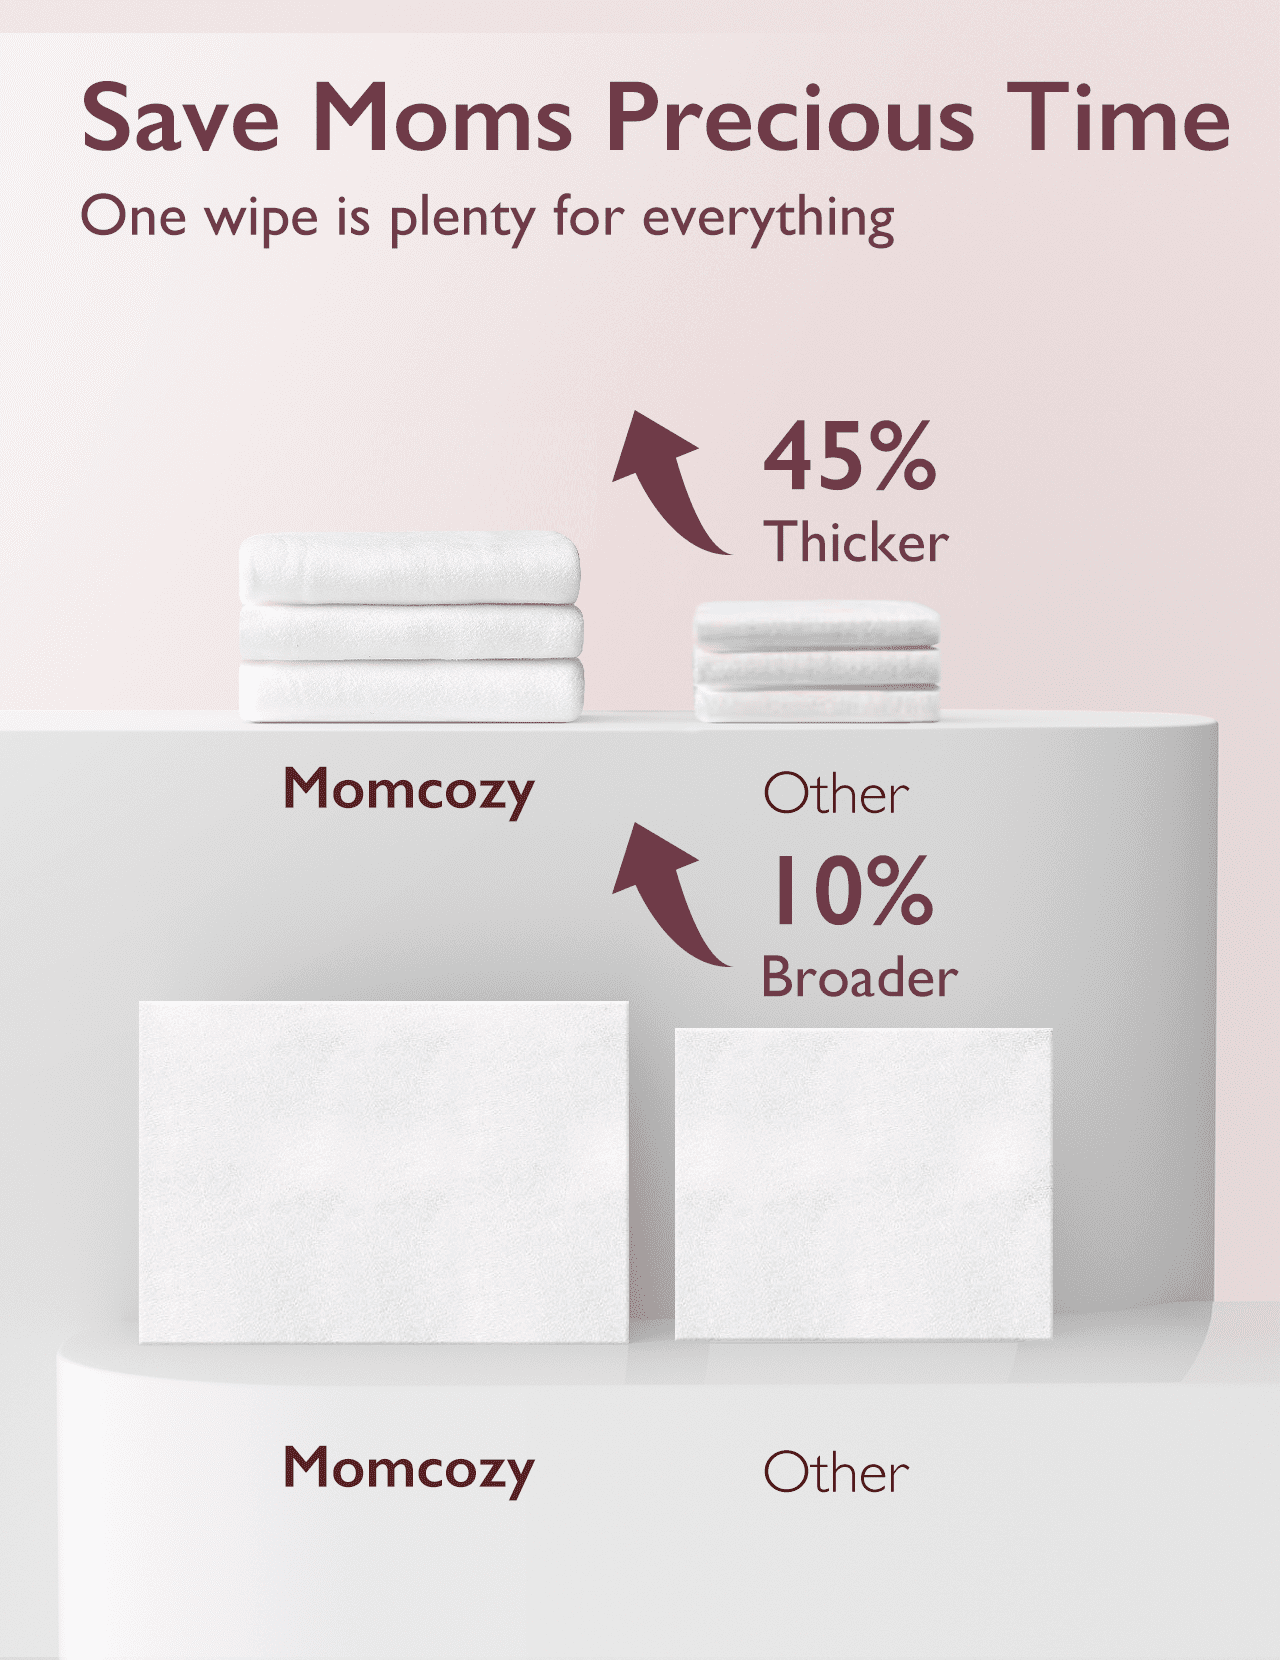 Momcozy Wipes for Breast Pump 90 ct, Quick Clean, Size: 27 mm, Gray